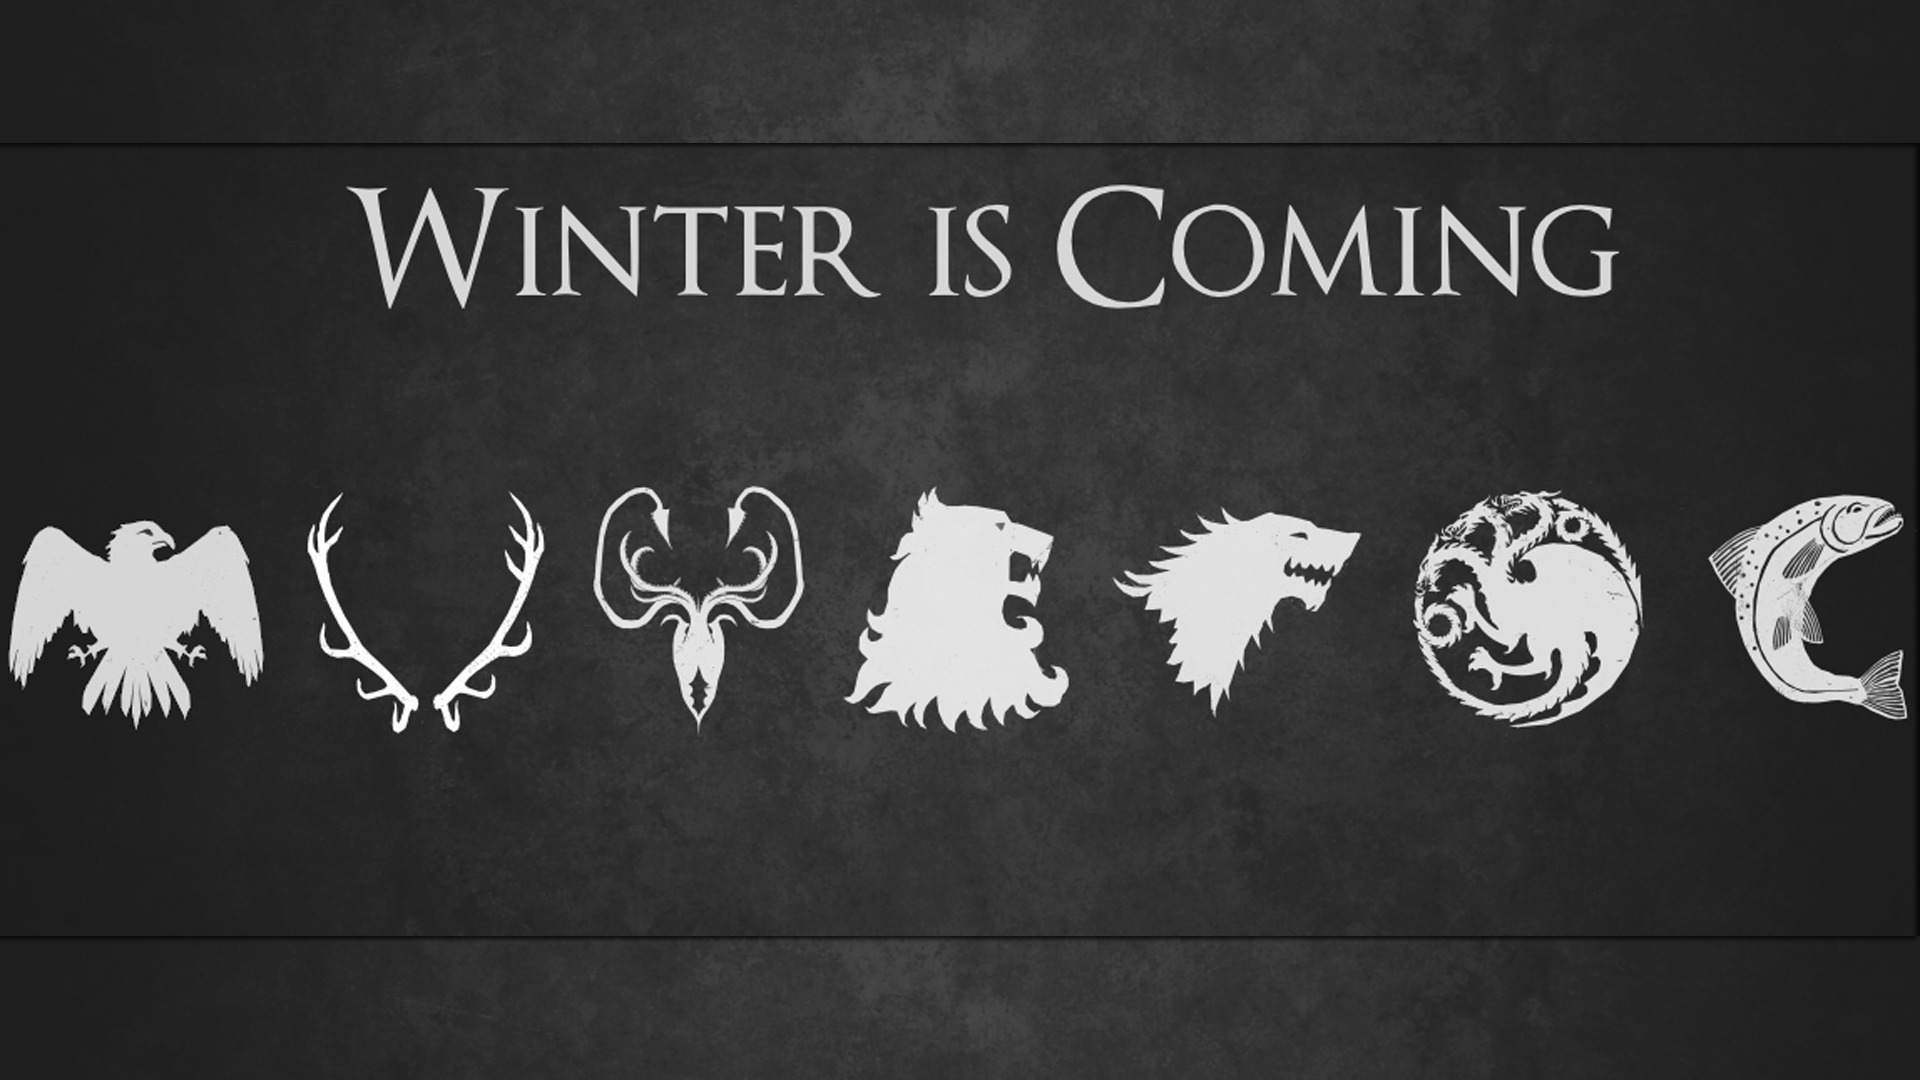 Game Of Thrones, Sigils, Winter Is Coming Wallpaper